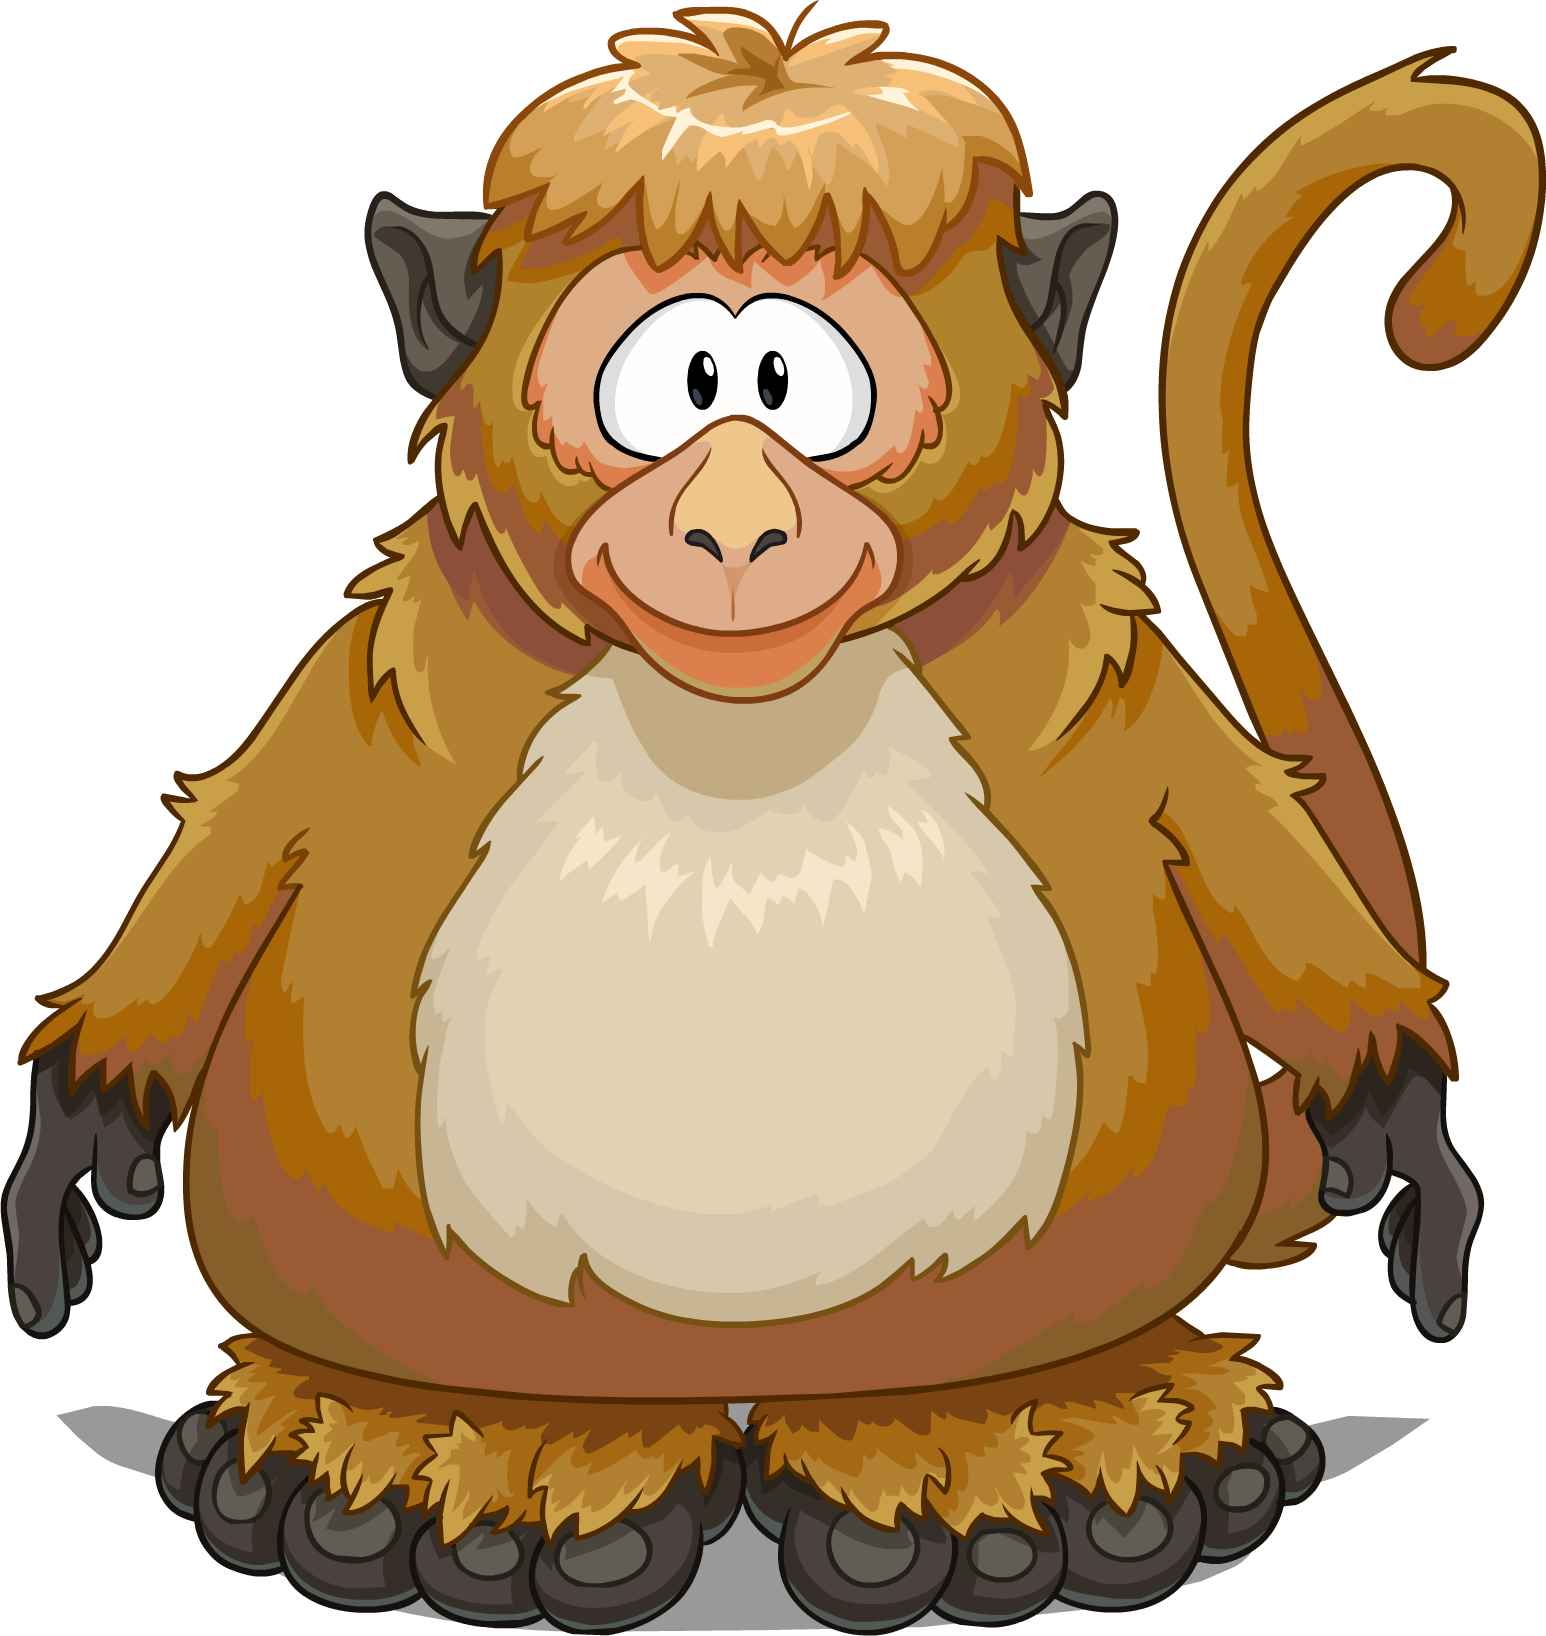 Monkey Costume On A Player Card - Club Penguin Monkey Costume (1546x1636)